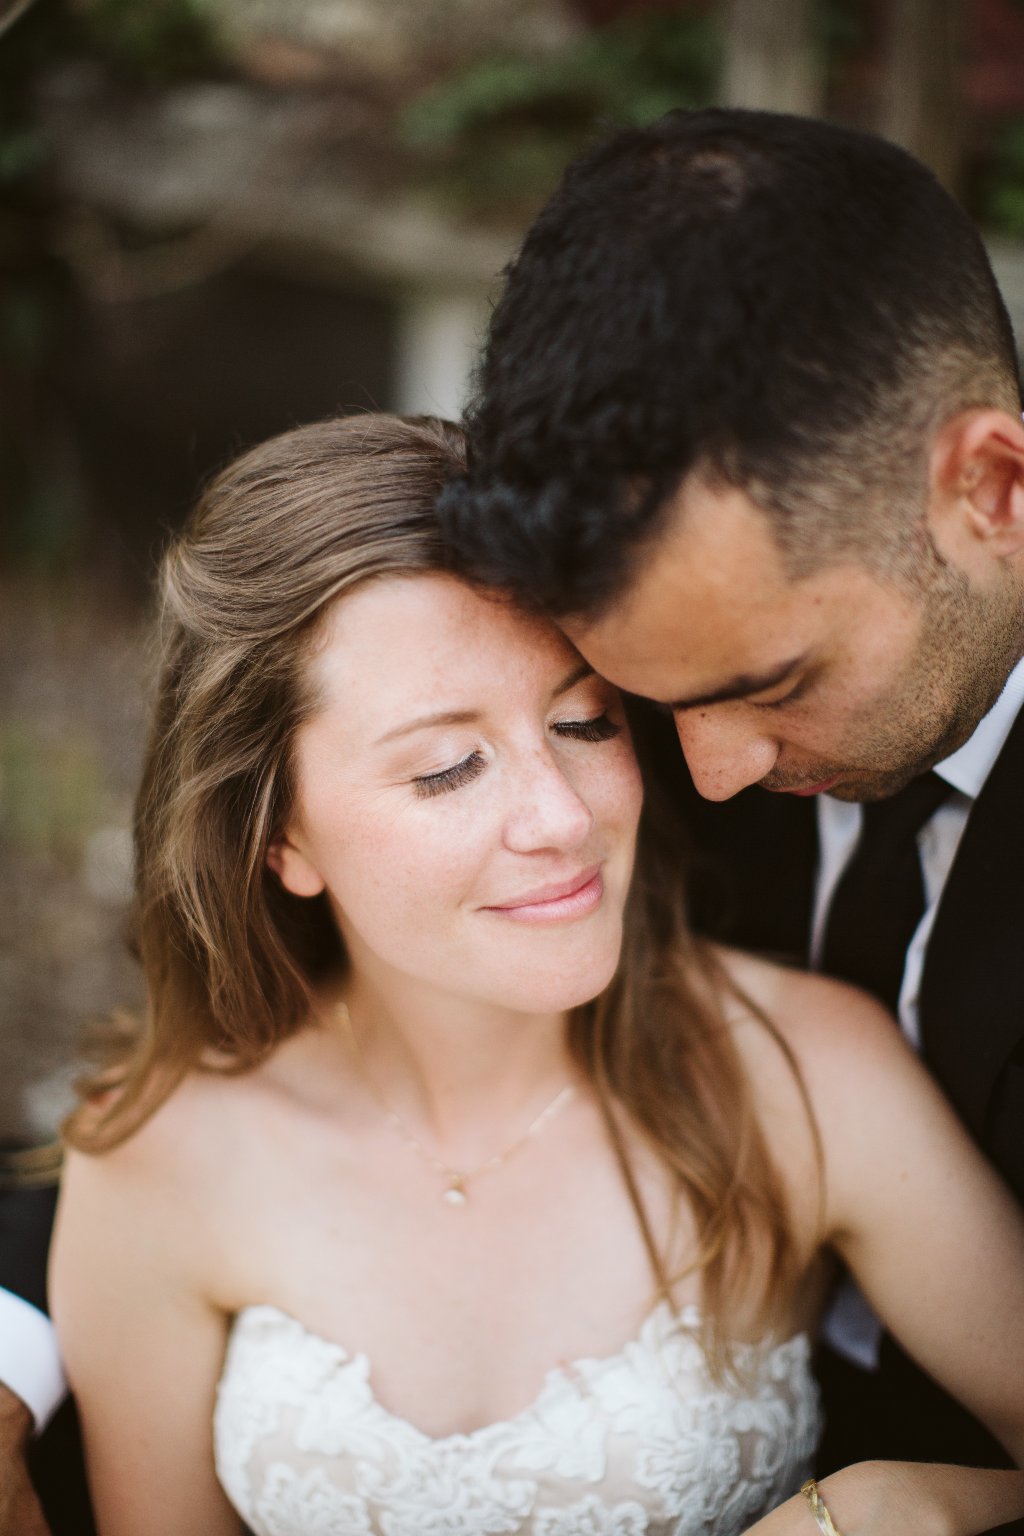 A sweet photo of a groom and a bride with stunning naturally beautiful makeup